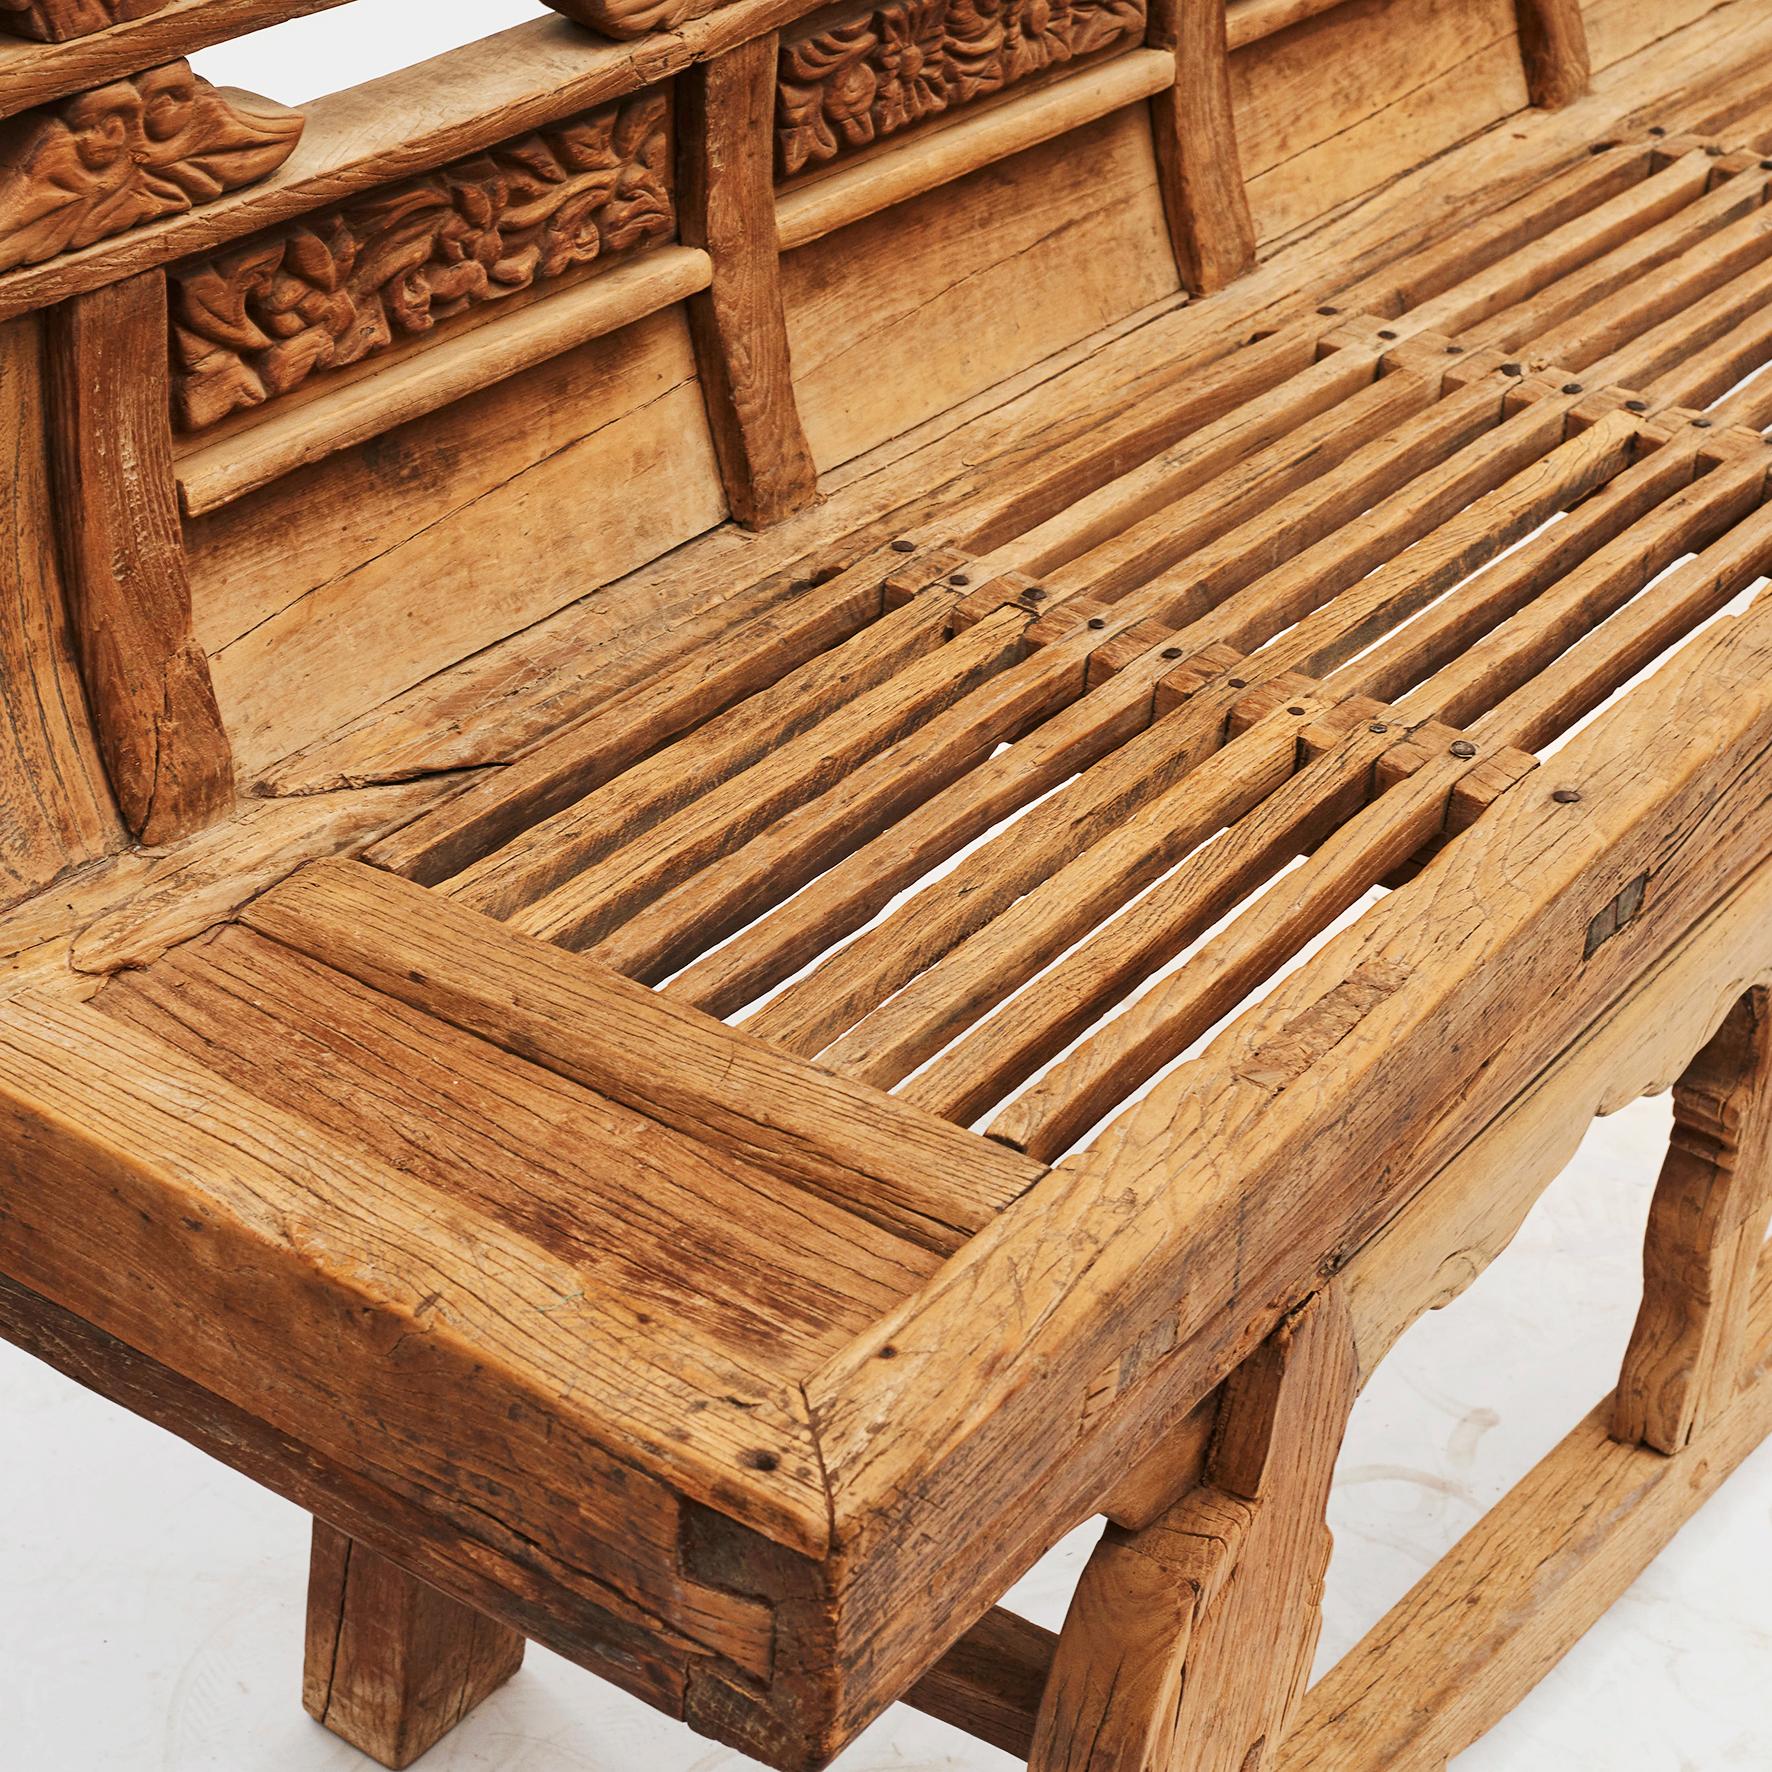 Chinese Antique Ming Temple Bench with Carved Details 17'th Ctr.